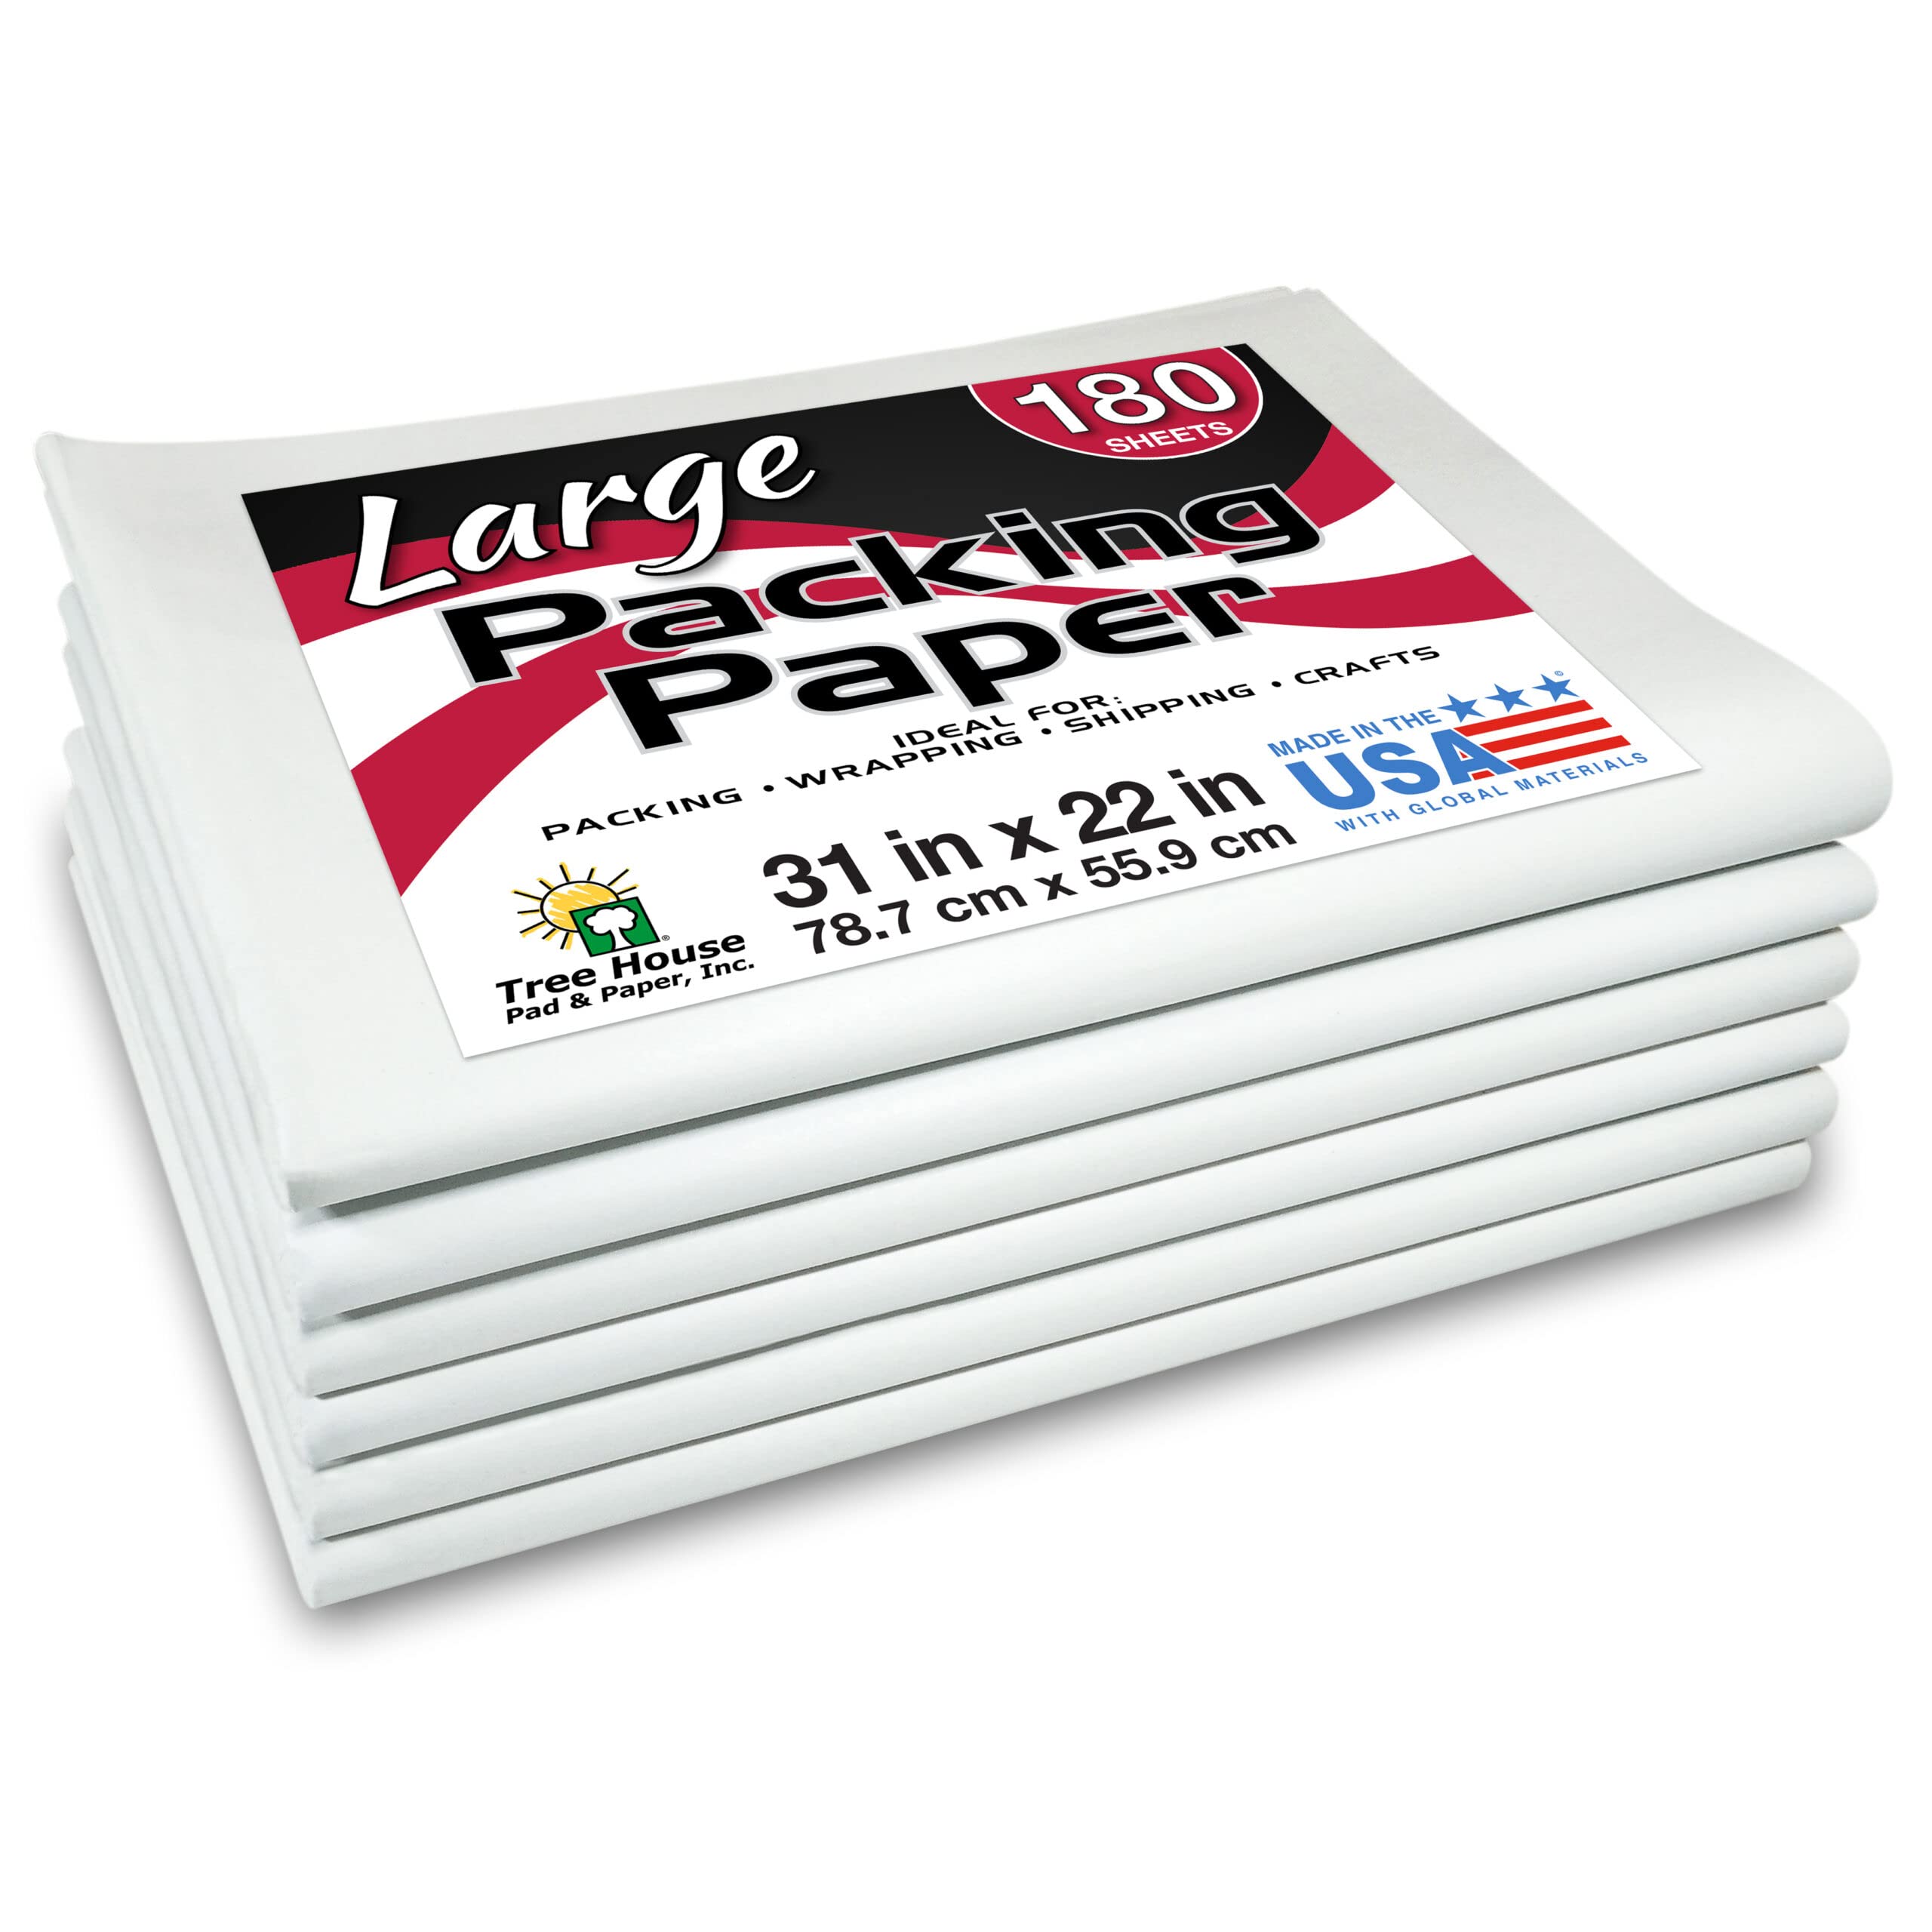 Packing Paper LARGE Sheets for Moving & Shipping, 180 Sheets of